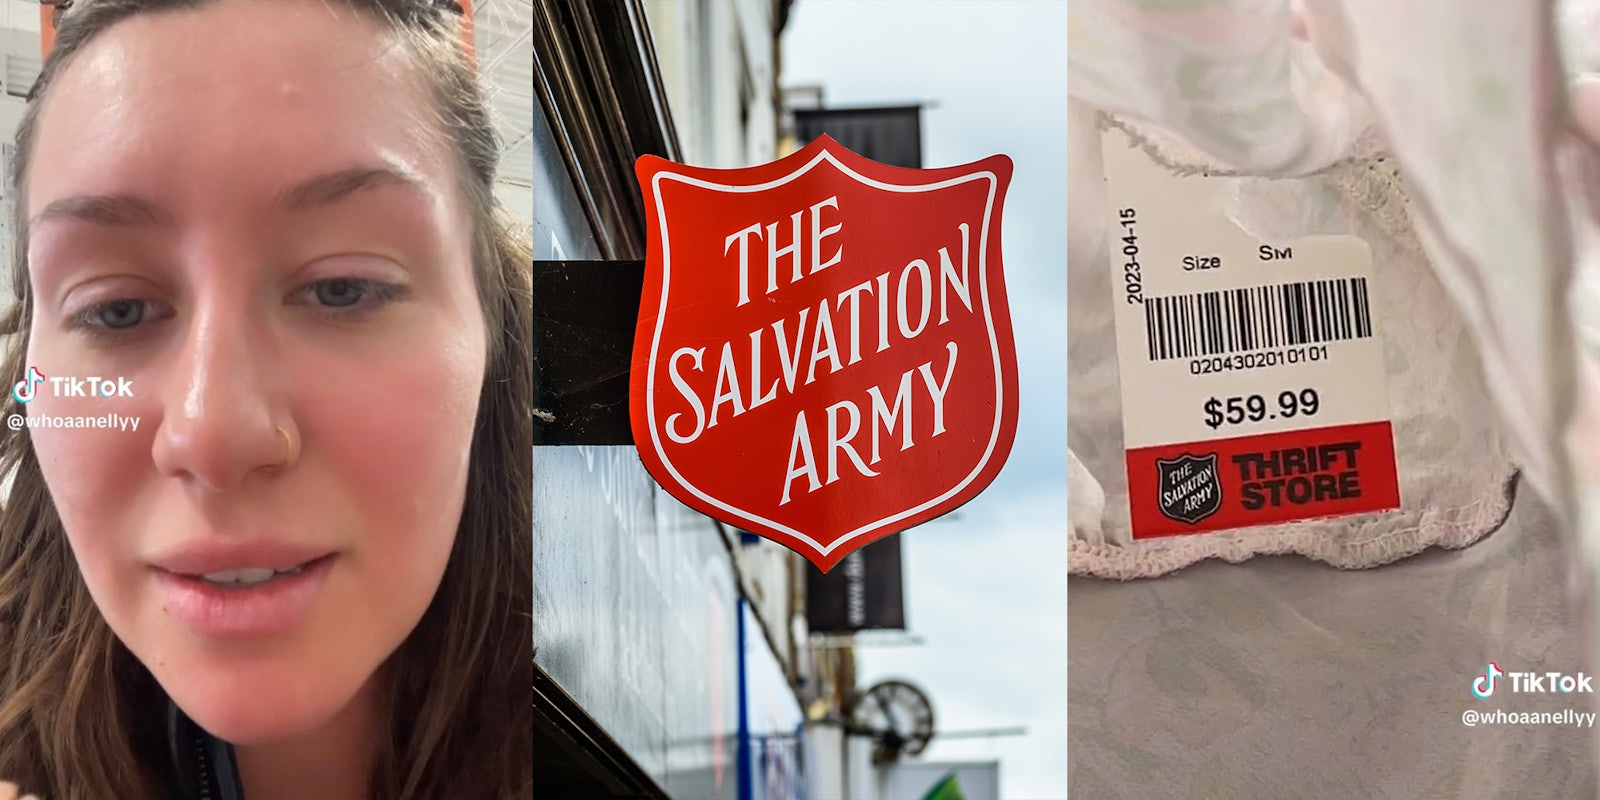 Customer slams the Salvation Army for selling Aritzia shirt for $60